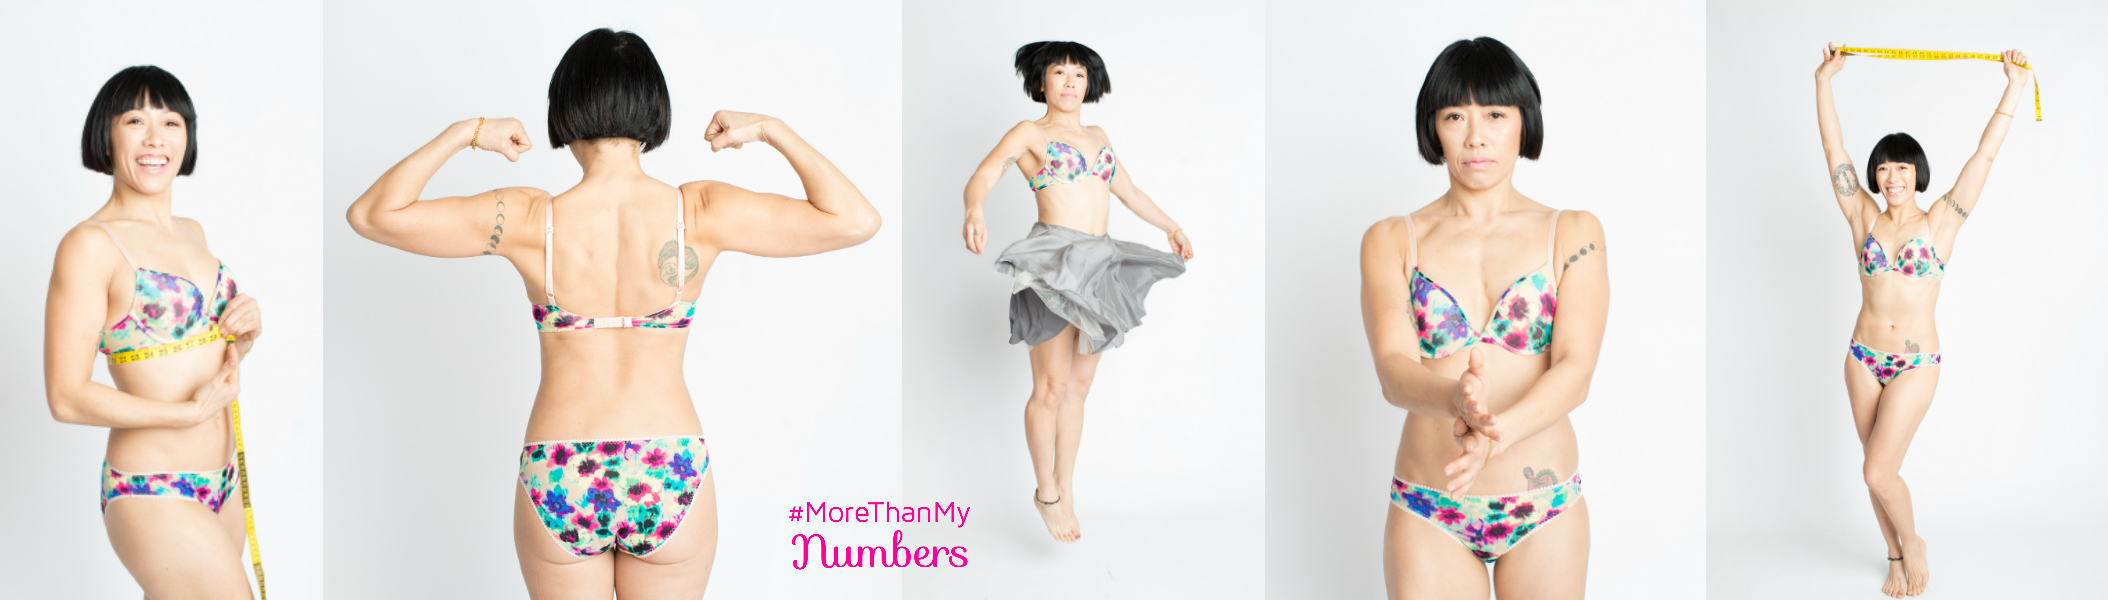 Becky in More Than My Numbers, Hurray Kimmay blog